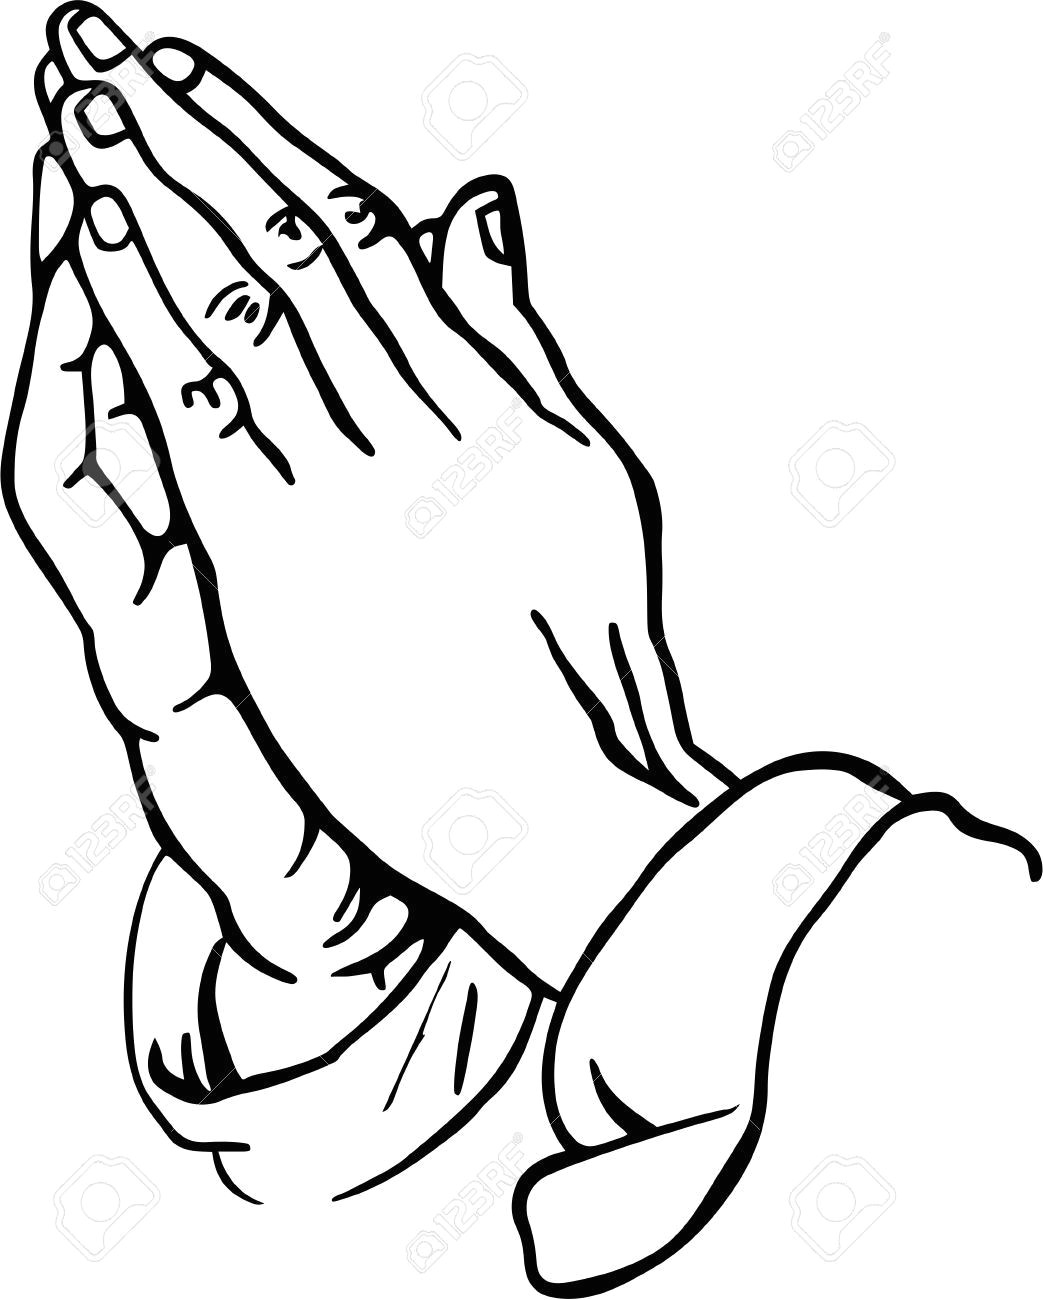 Drawings Of Praying Hands with Rosary Praying Hands Clipart Stock Photo Picture and Royalty Free Image